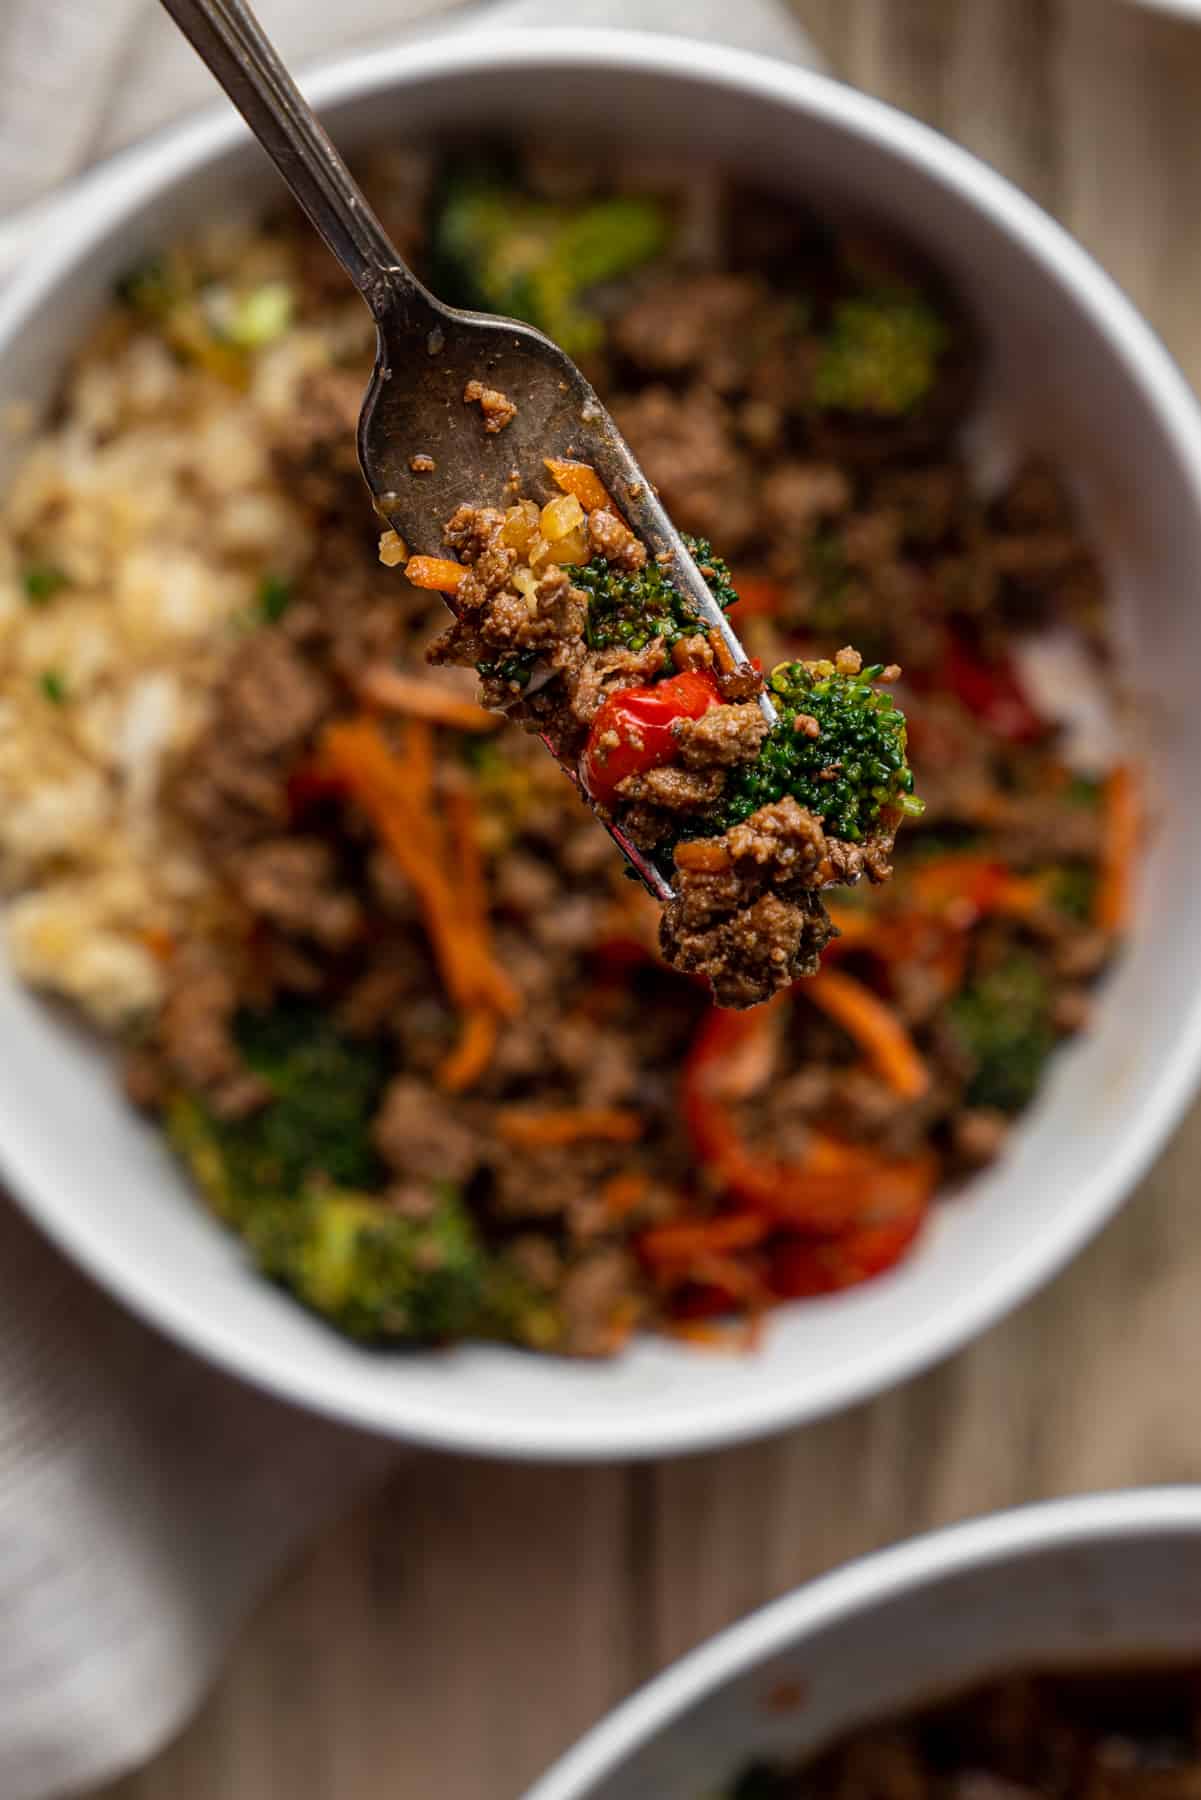 Fork with some teriyaki beef and vegetables.